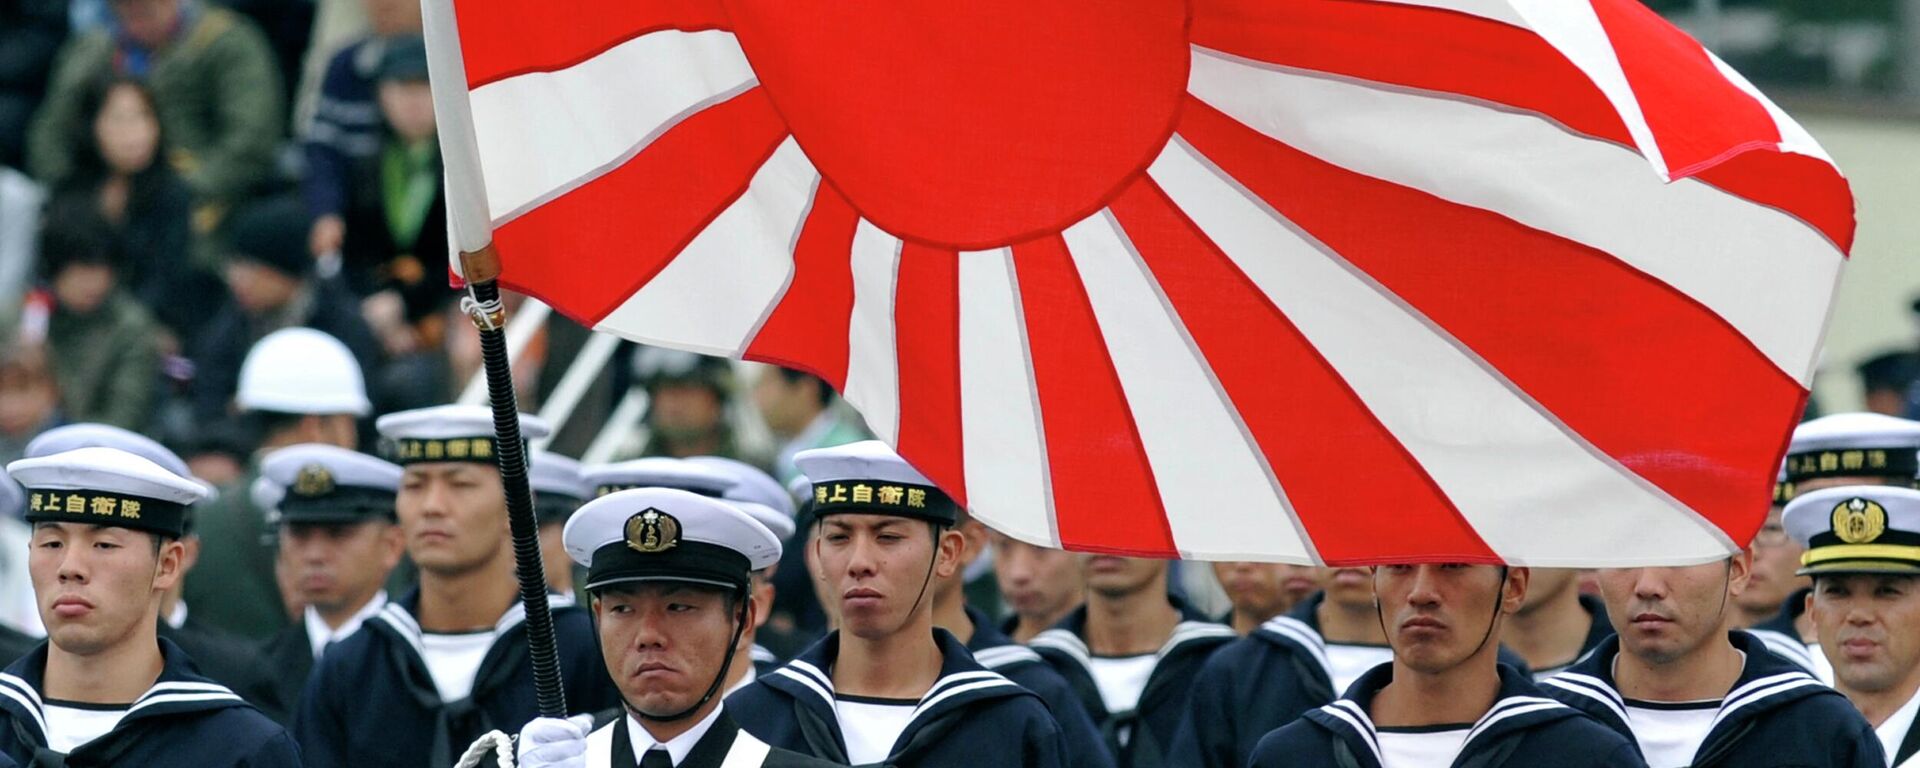 Troops of the Maritime Self-Defense Force attend an inspection parade at the Asaka base in suburban Tokyo on October 24, 2010 - Sputnik International, 1920, 07.06.2022